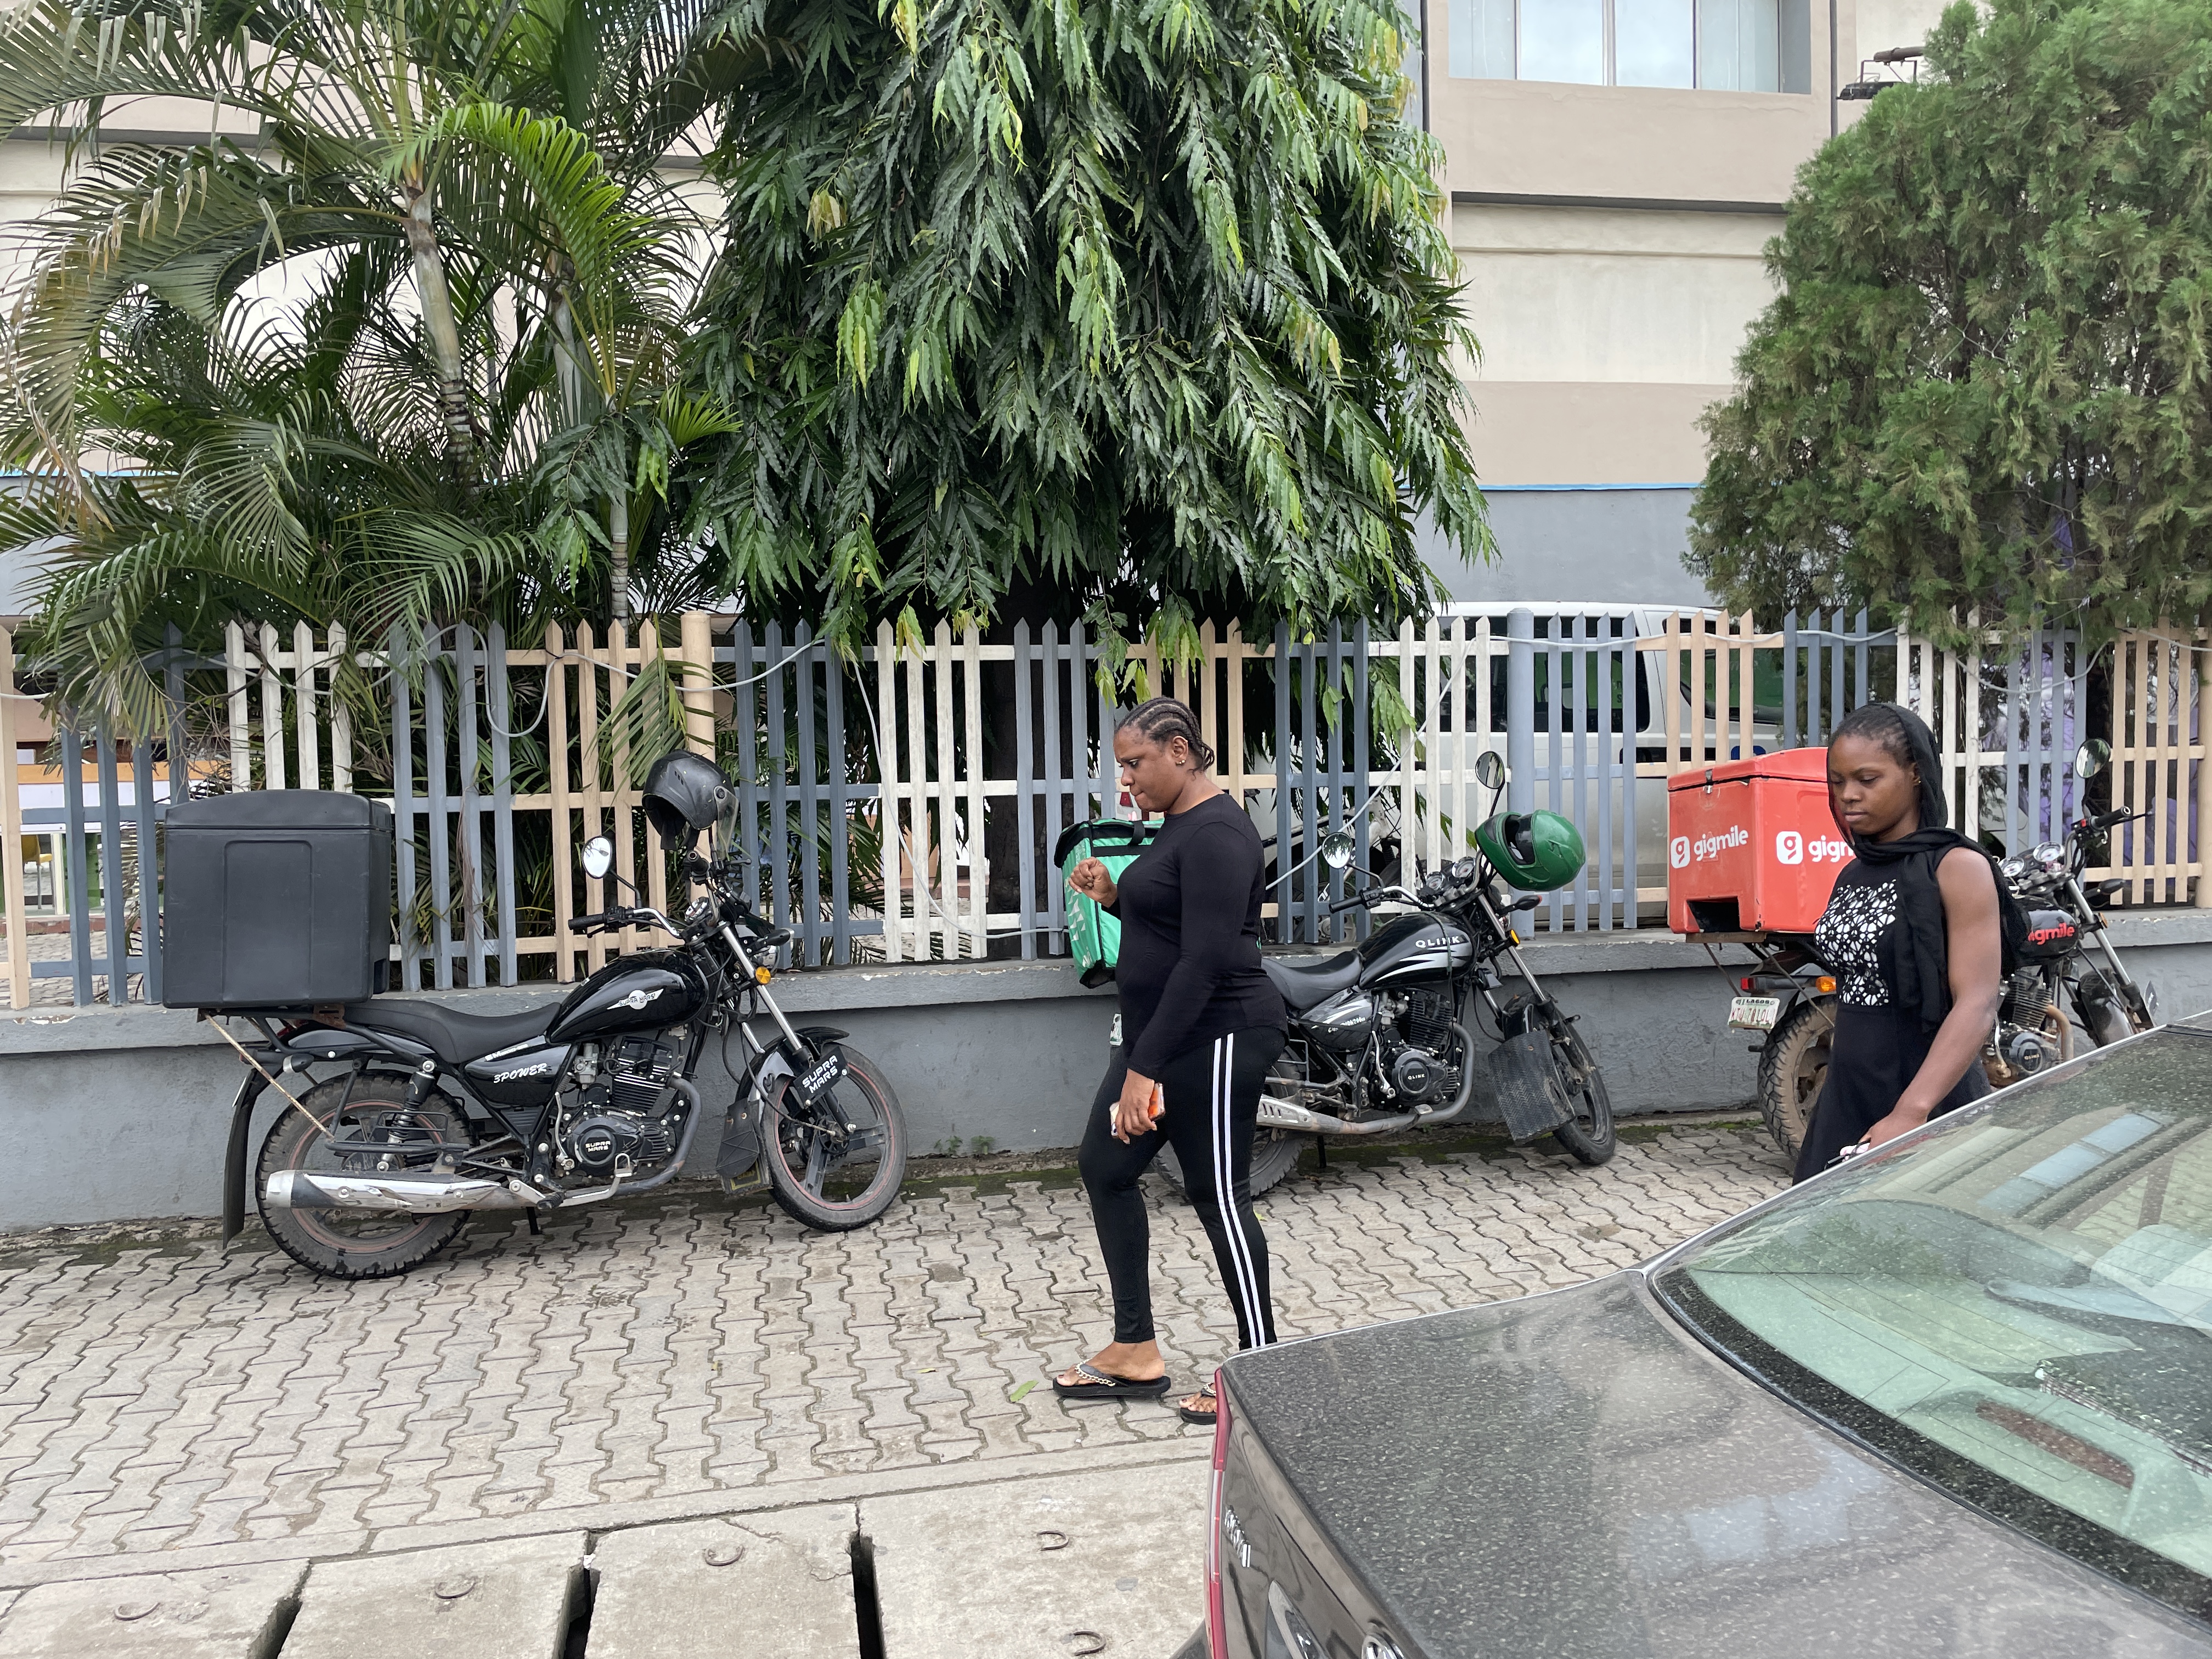 Looking for beautiful days: The real lives of Lagos dispatch riders